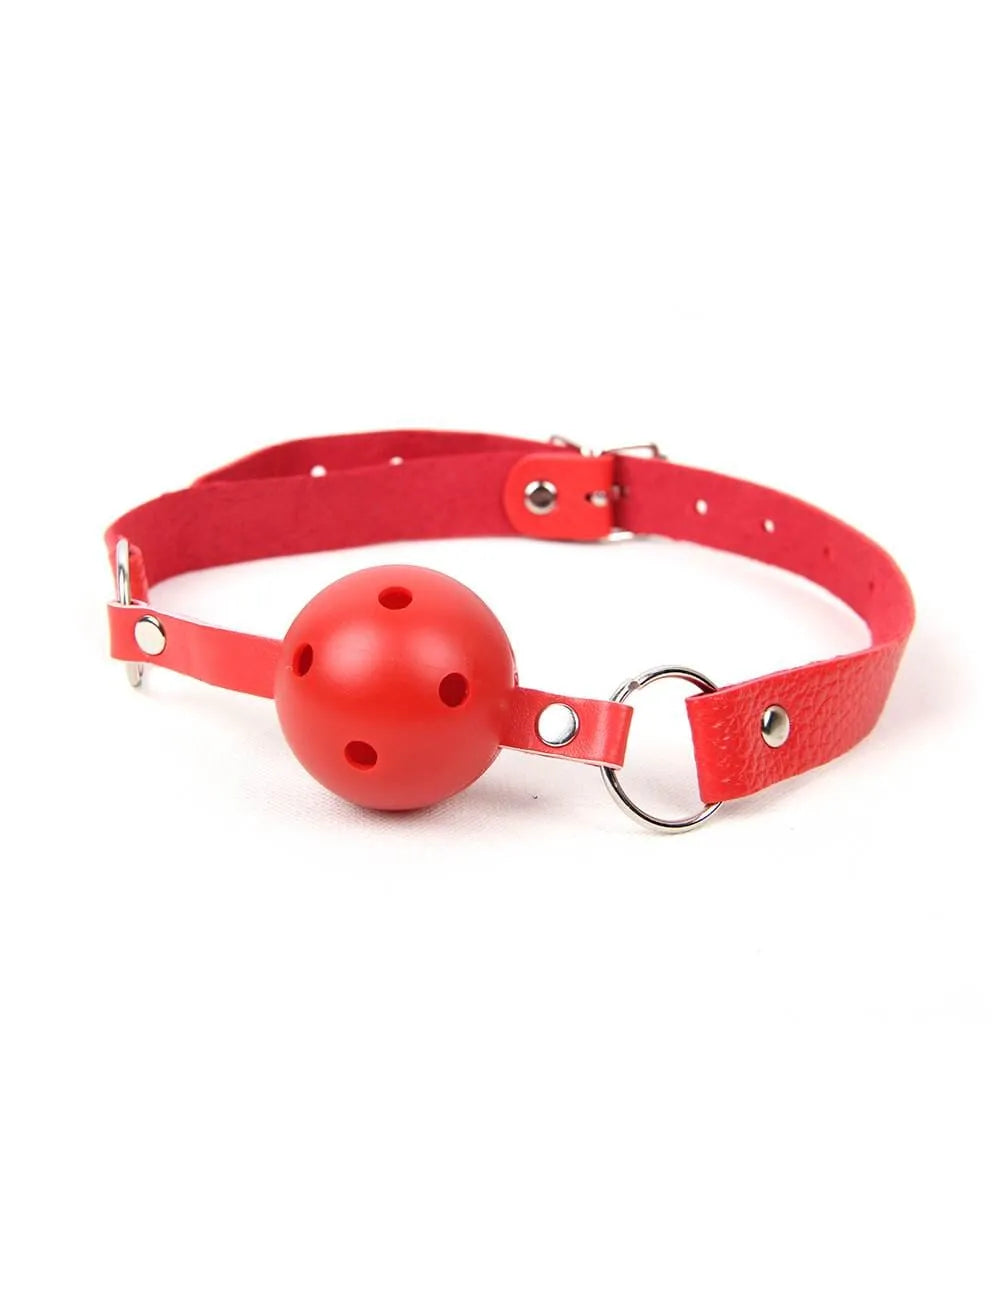 a red leather collar with a ball gag on it